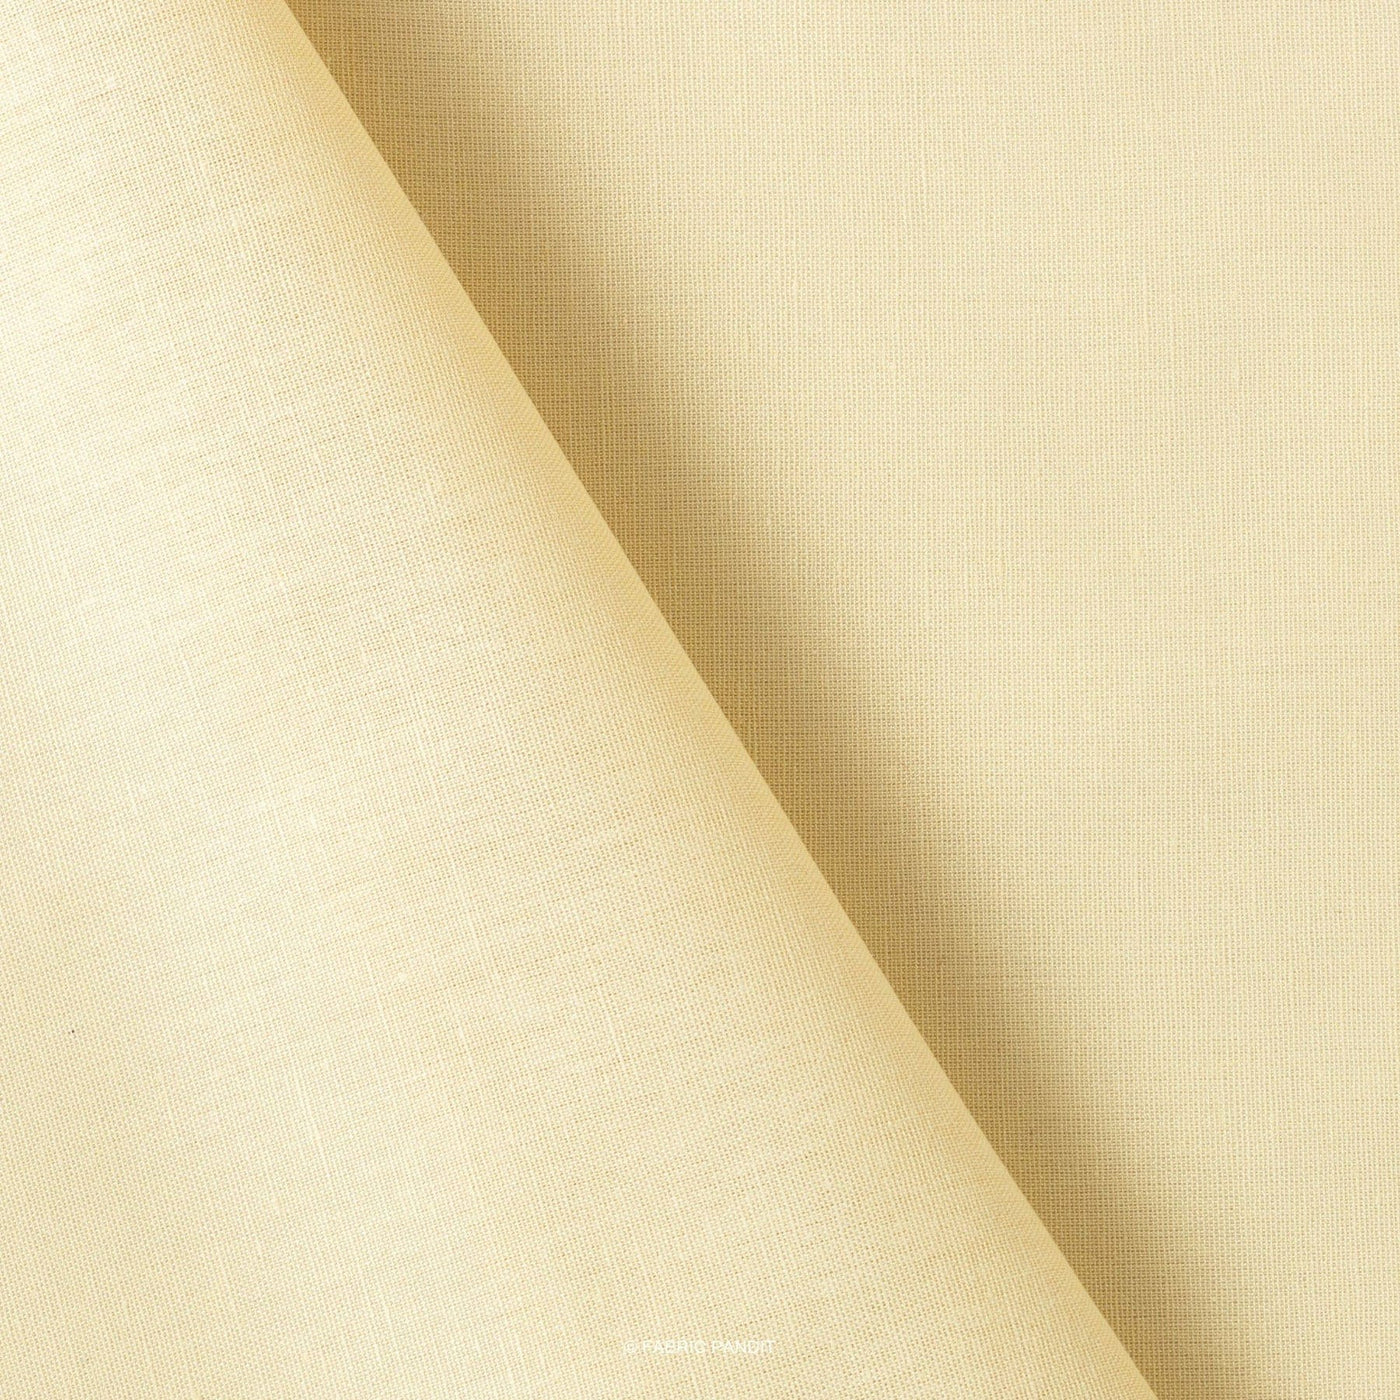 Fabric Pandit Fabric Ivory Color Pure Cotton Linen Fabric (Width 42 Inches)